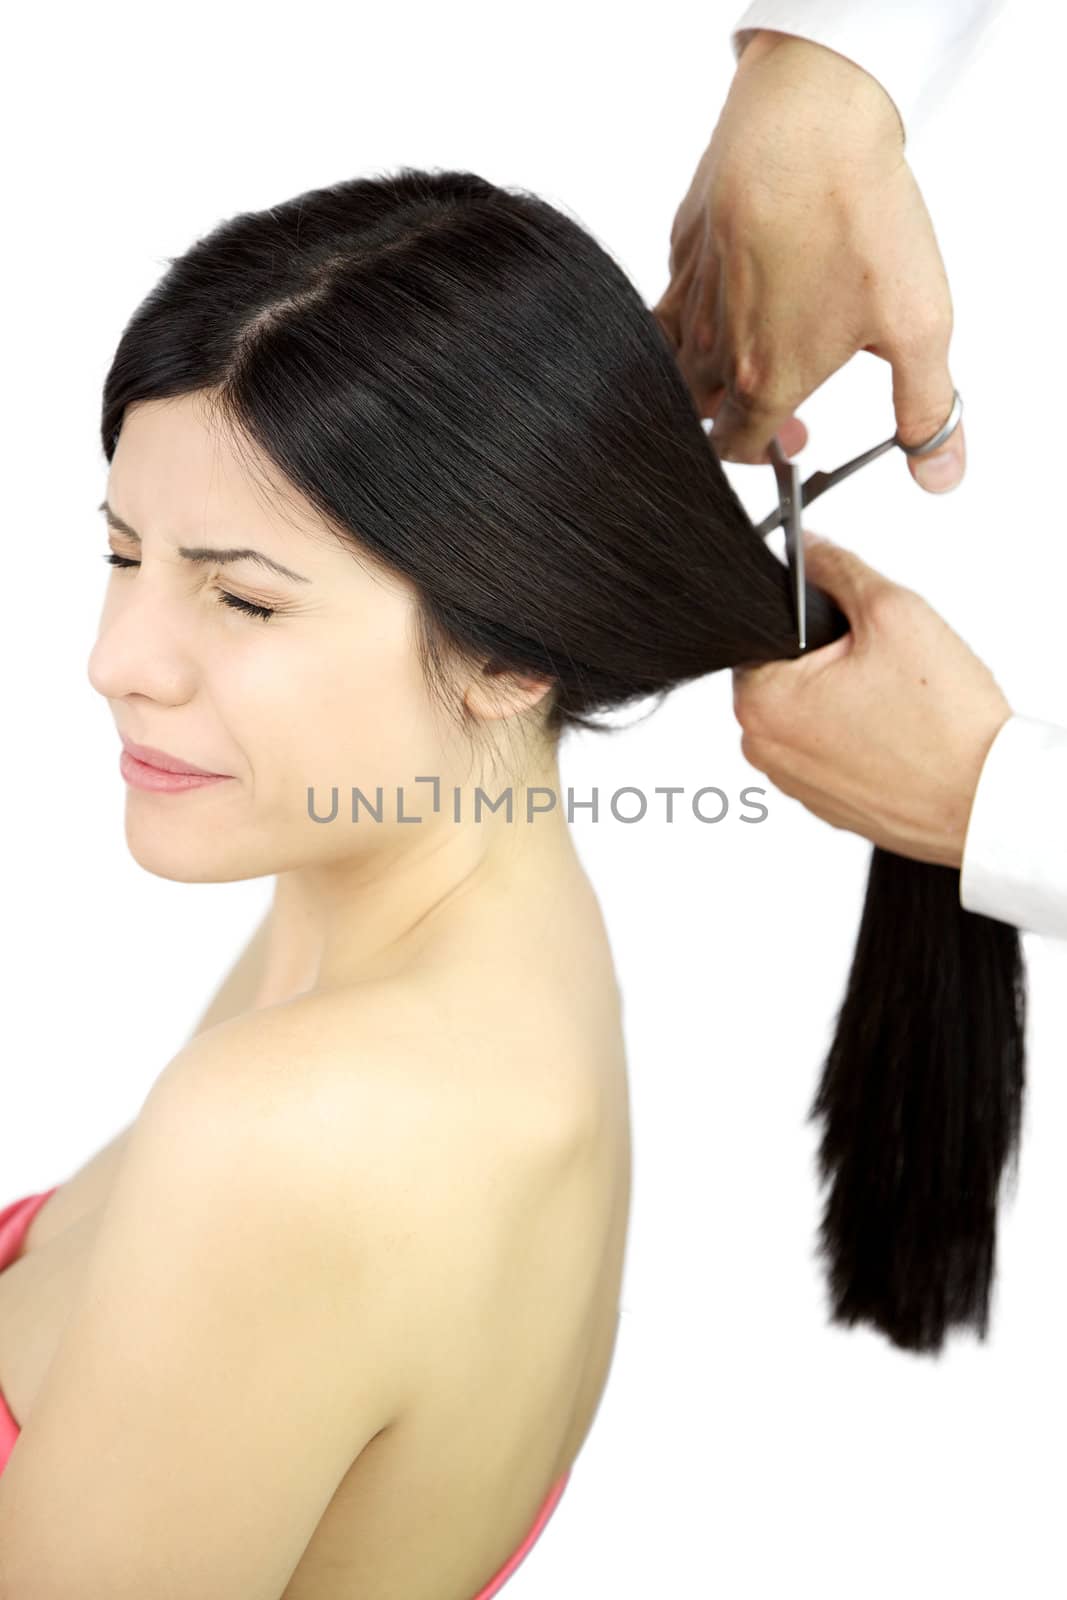 Beautiful woman keeping her eyes closed scared while hairdresser cuts her long ponytail by fmarsicano